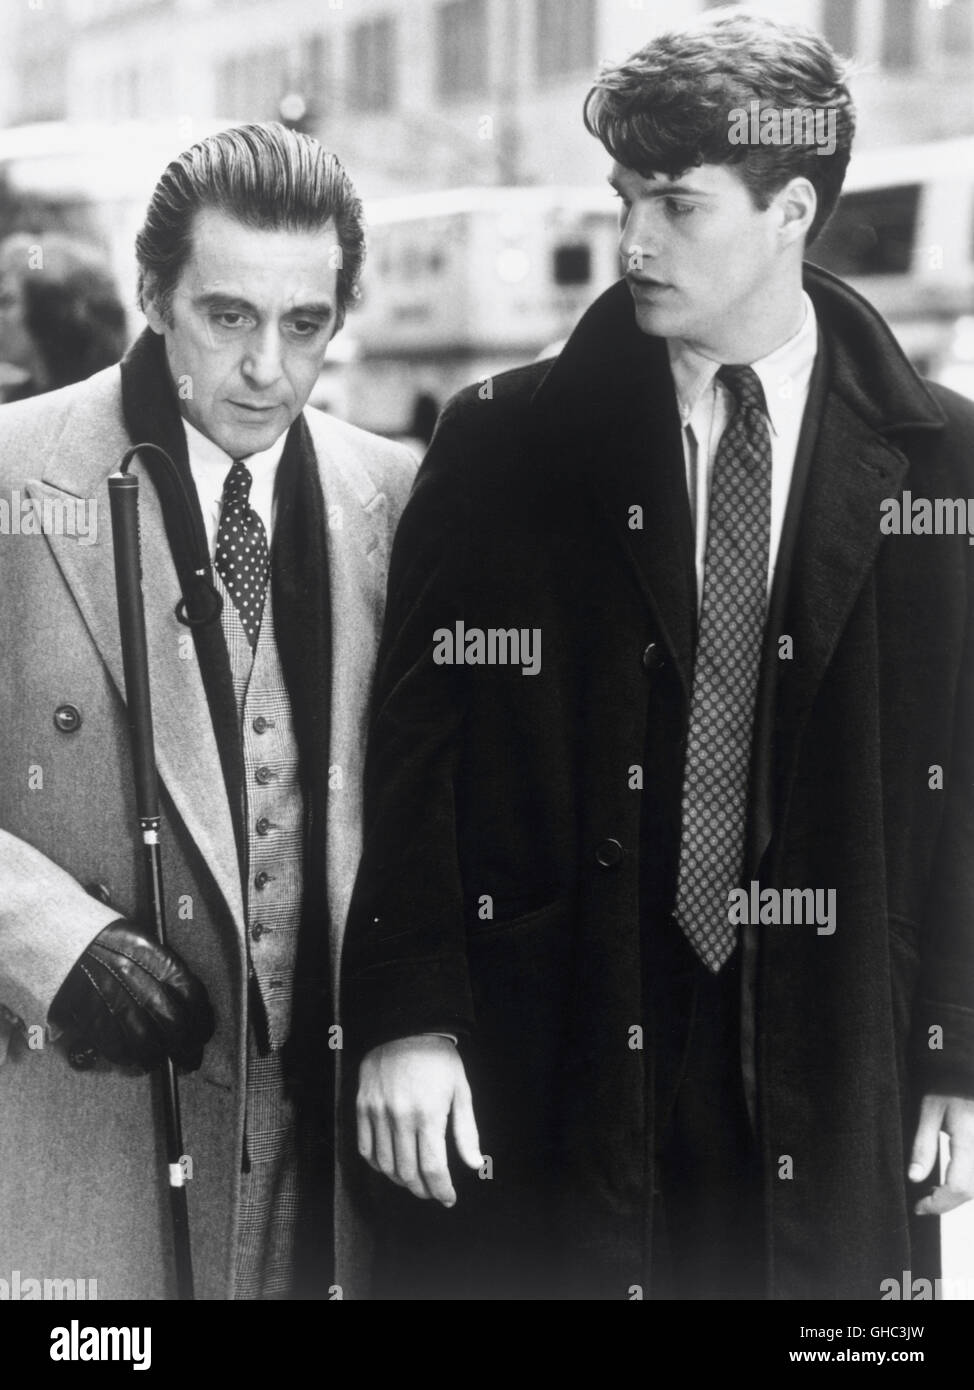 DER DUFT DER FRAUEN Scent of a Woman USA 1992 Martin Brest Frank Slade (AL PACINO), a blind and surly ex-Army officer at loose in New York with his young guide Charlie Simms (CHRIS O'DONNELL) in tow. Regie: Martin Brest aka. Scent of a Woman Stock Photo